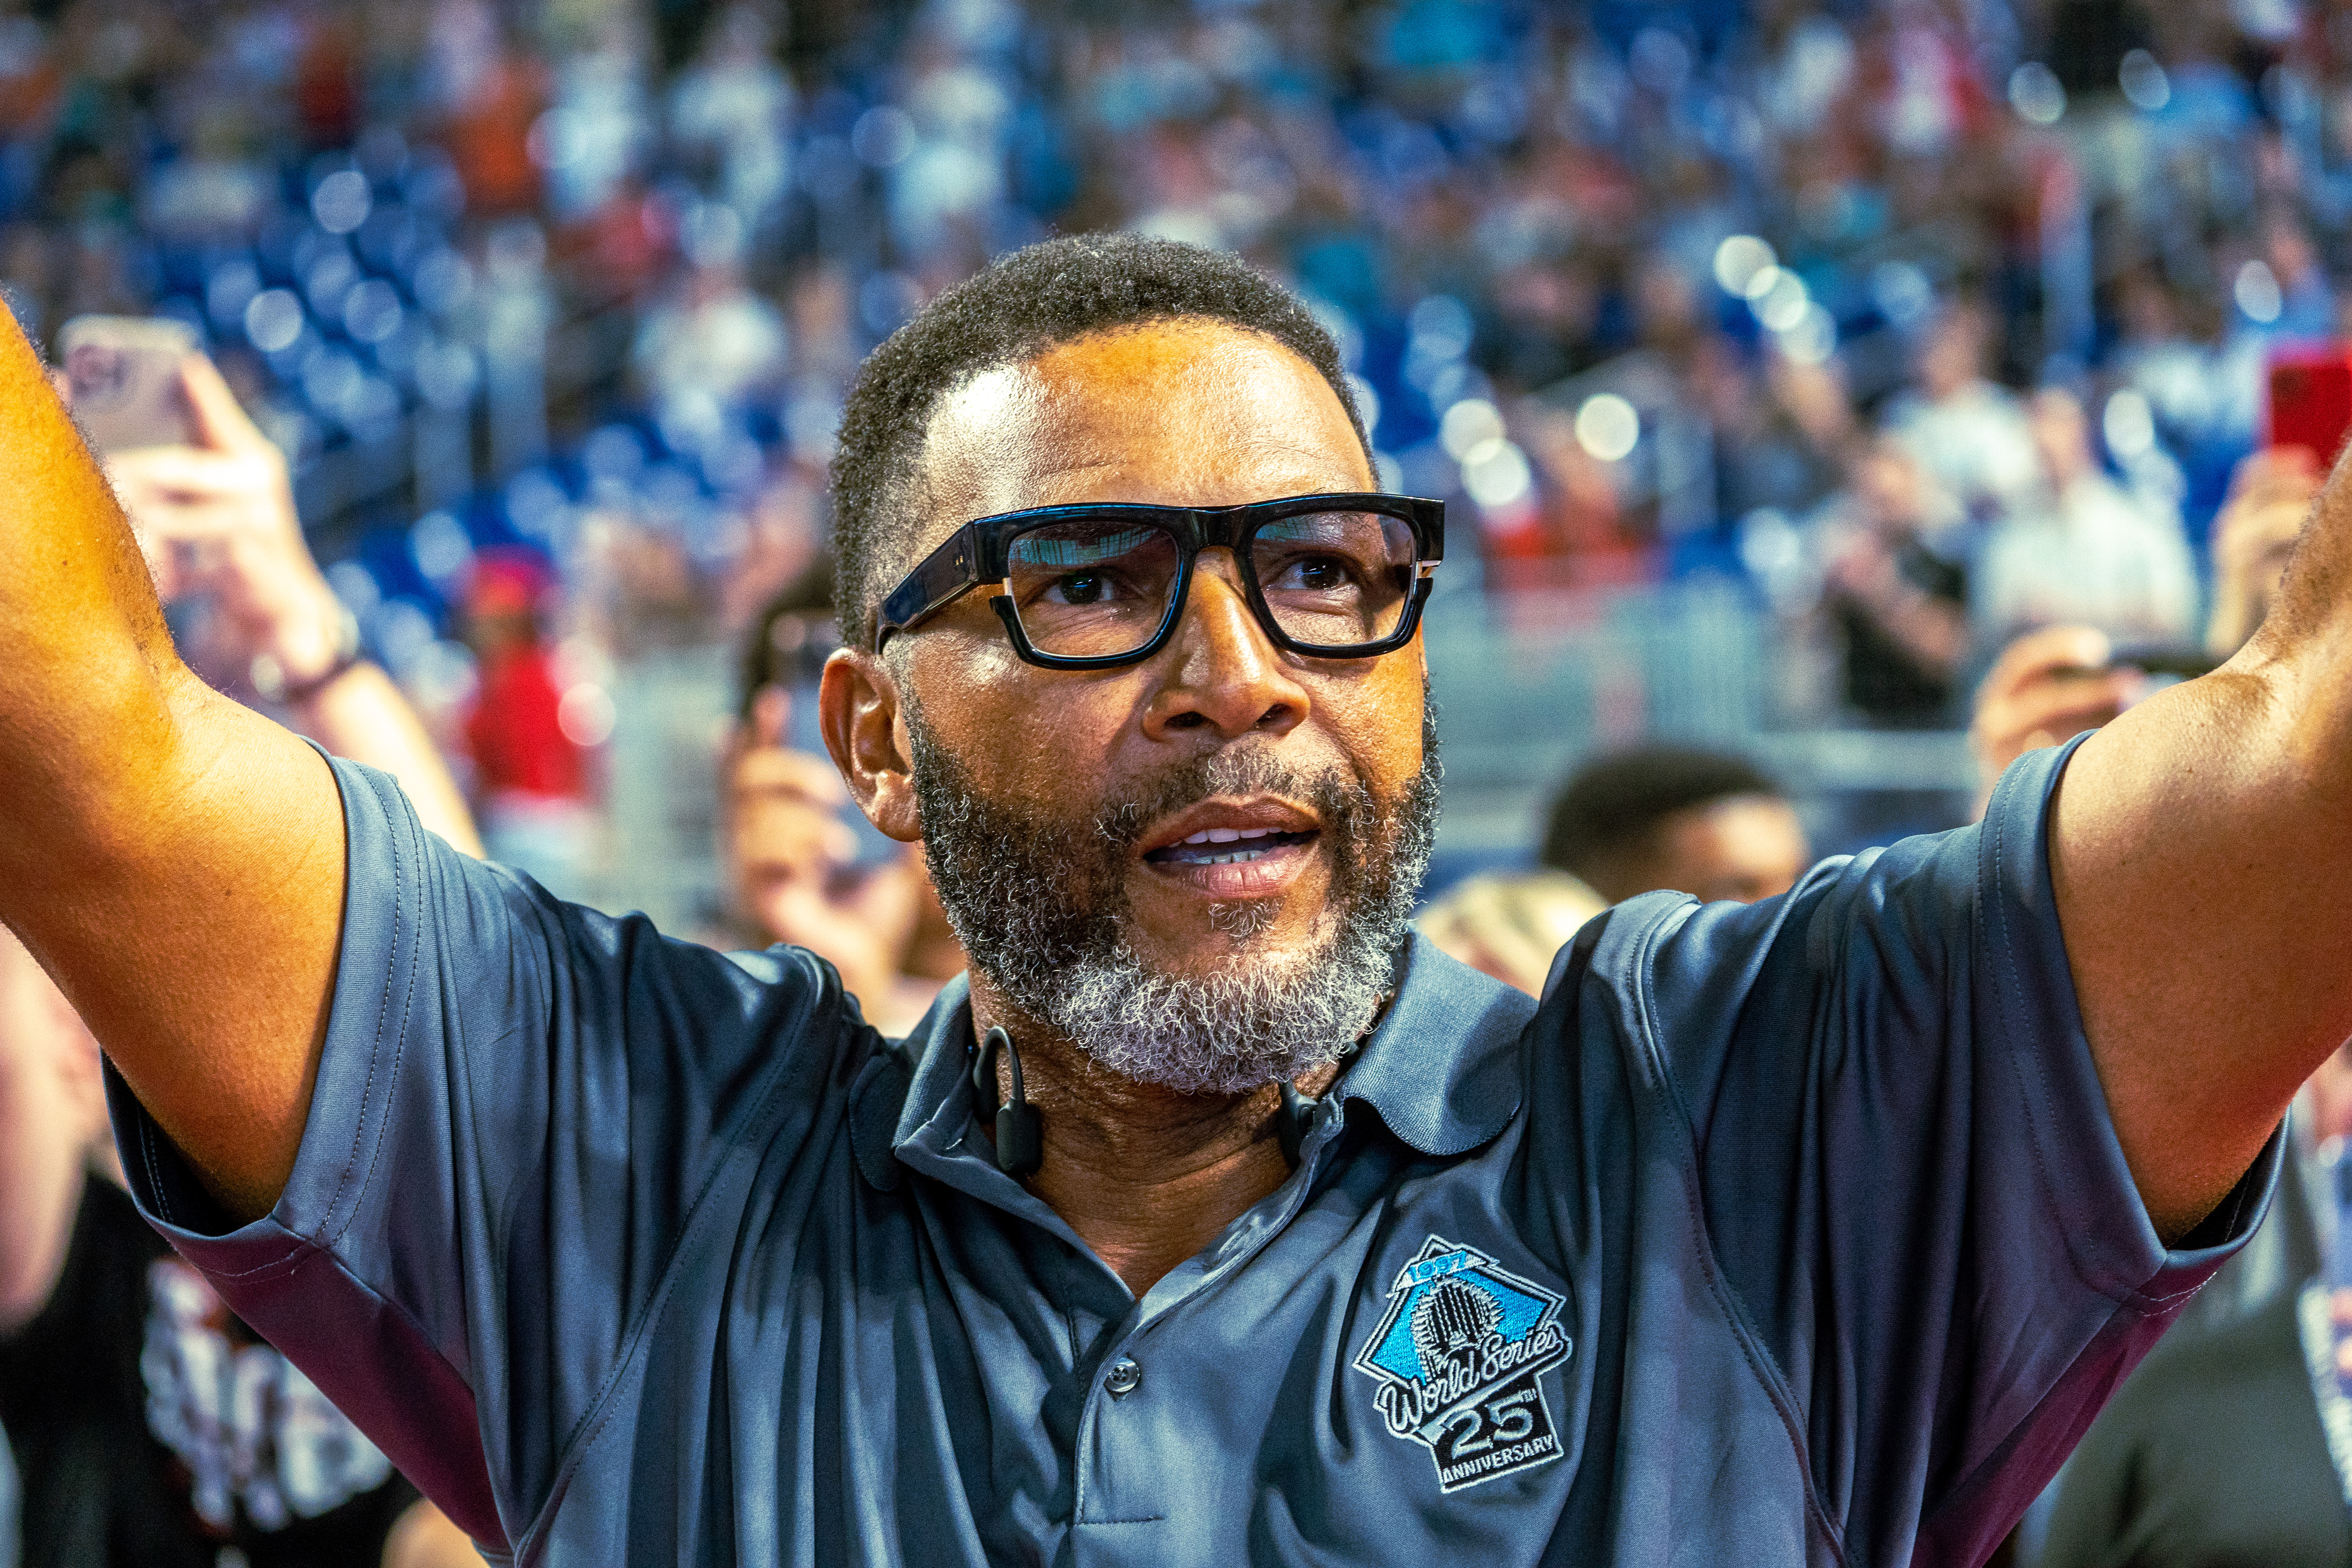 Gary Sheffield is introduced at LoanDepot Park during the 25th anniversary celebration of the 1997 Florida Marlins World Series championship